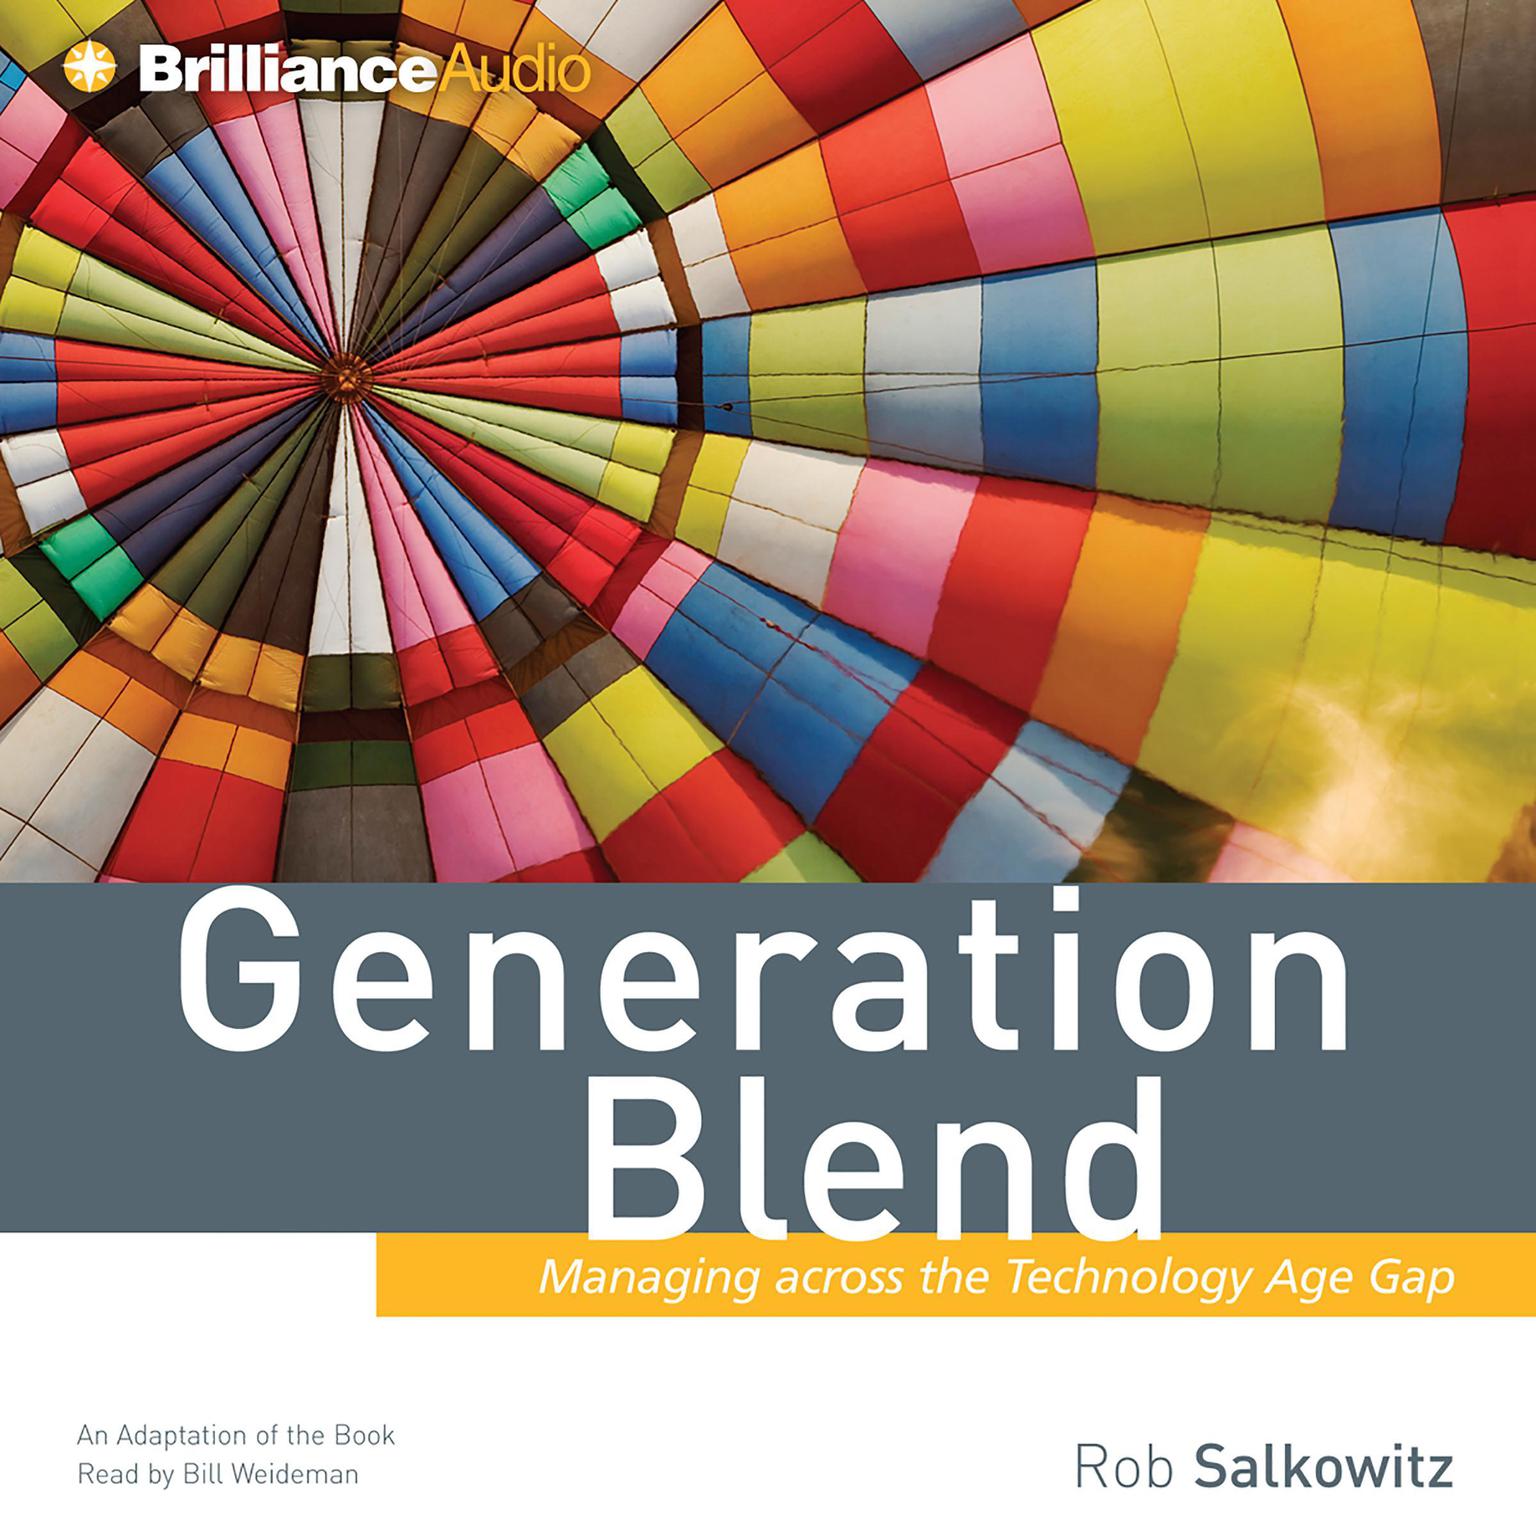 Generation Blend (Abridged): Managing across the Technology Age Gap Audiobook, by Rob Salkowitz